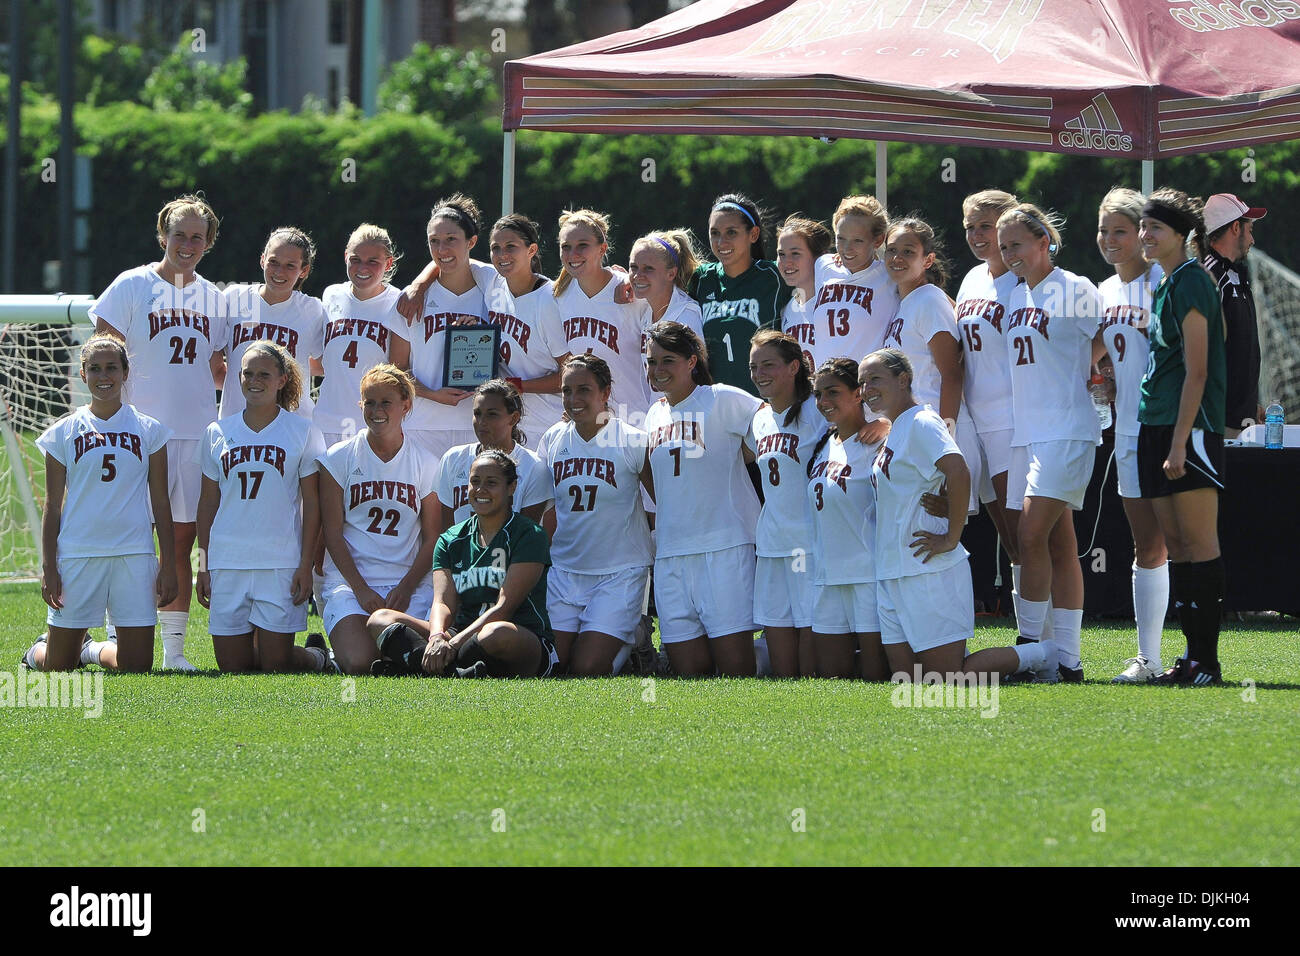 Sept. 6, 2010 - Denver, Colorado, United States of America - Denver players pose for a picture after winning the Denver Invitational. The Denver Pioneers defeated the Drake Bulldogs, 4-1, to win the Denver Invitational at CIBER Field at the Ritchie Center on the campus of the University of Denver. (Credit Image: © Andrew Fielding/Southcreek Global/ZUMApress.com) Stock Photo